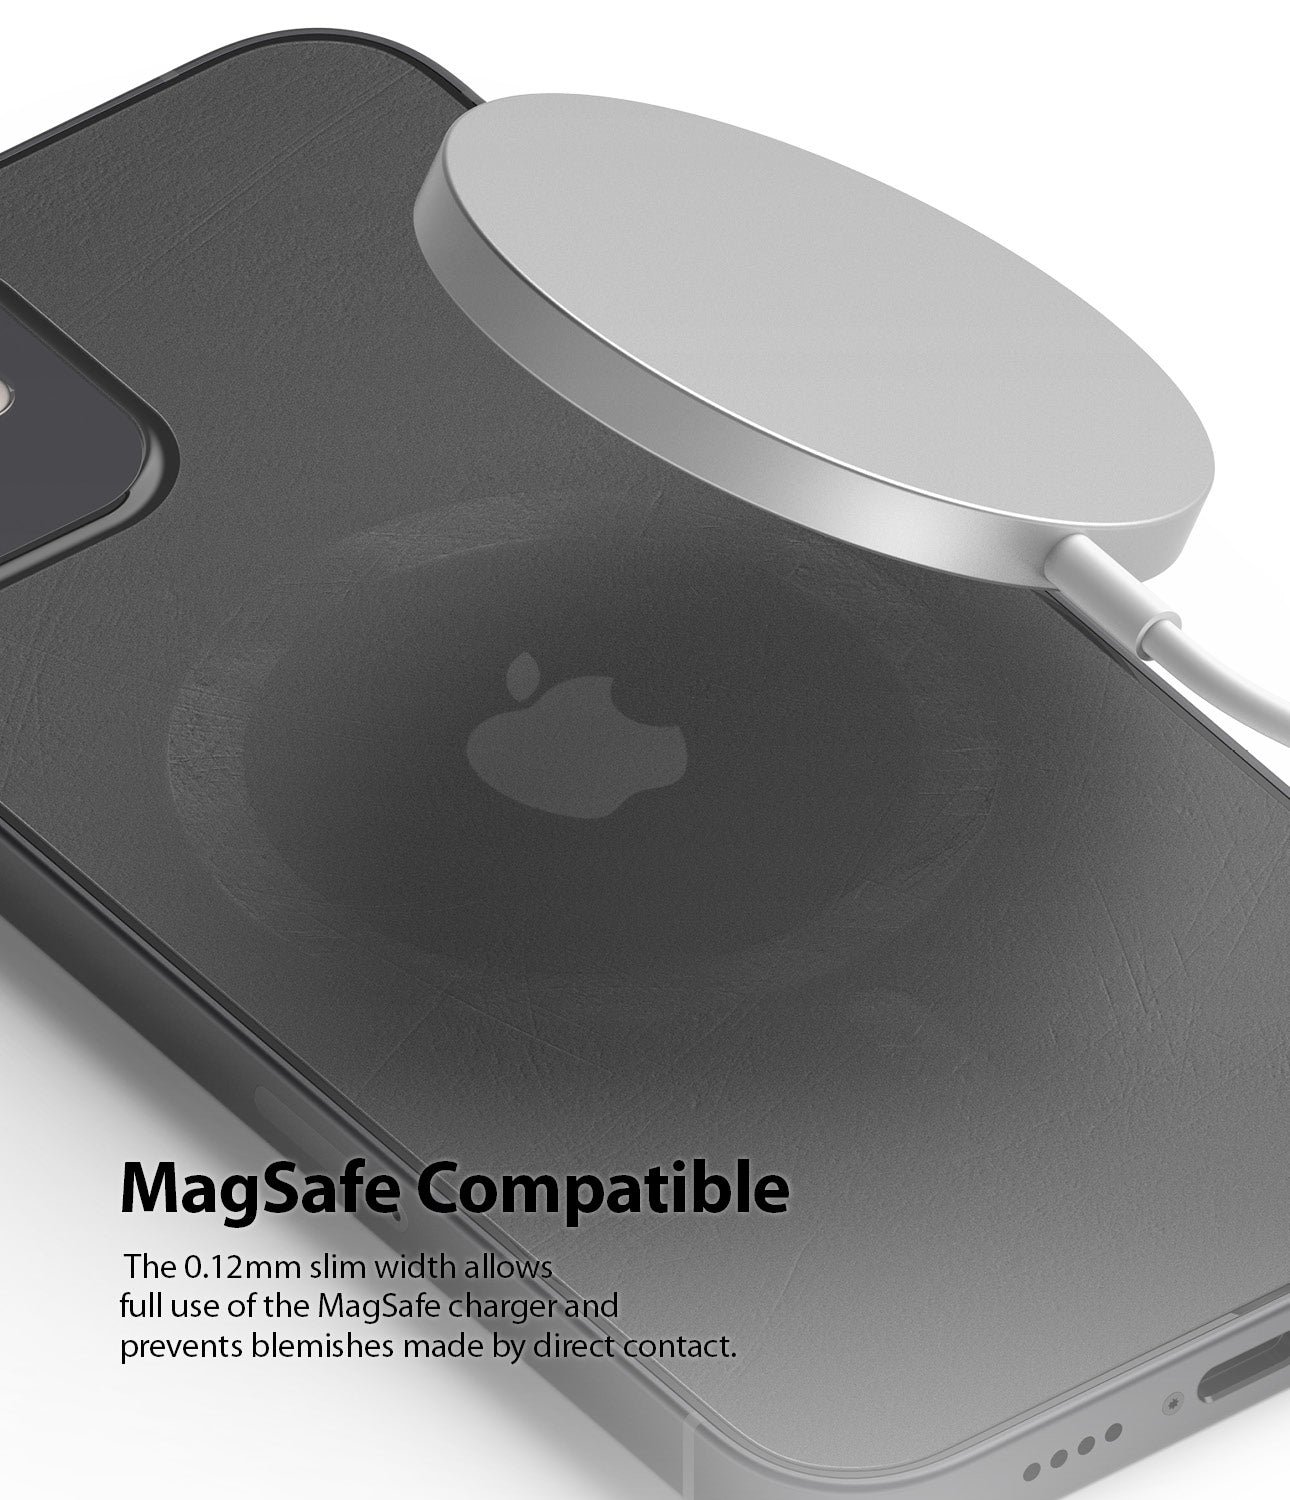 magsafe compatible - the 0.12mm slim width